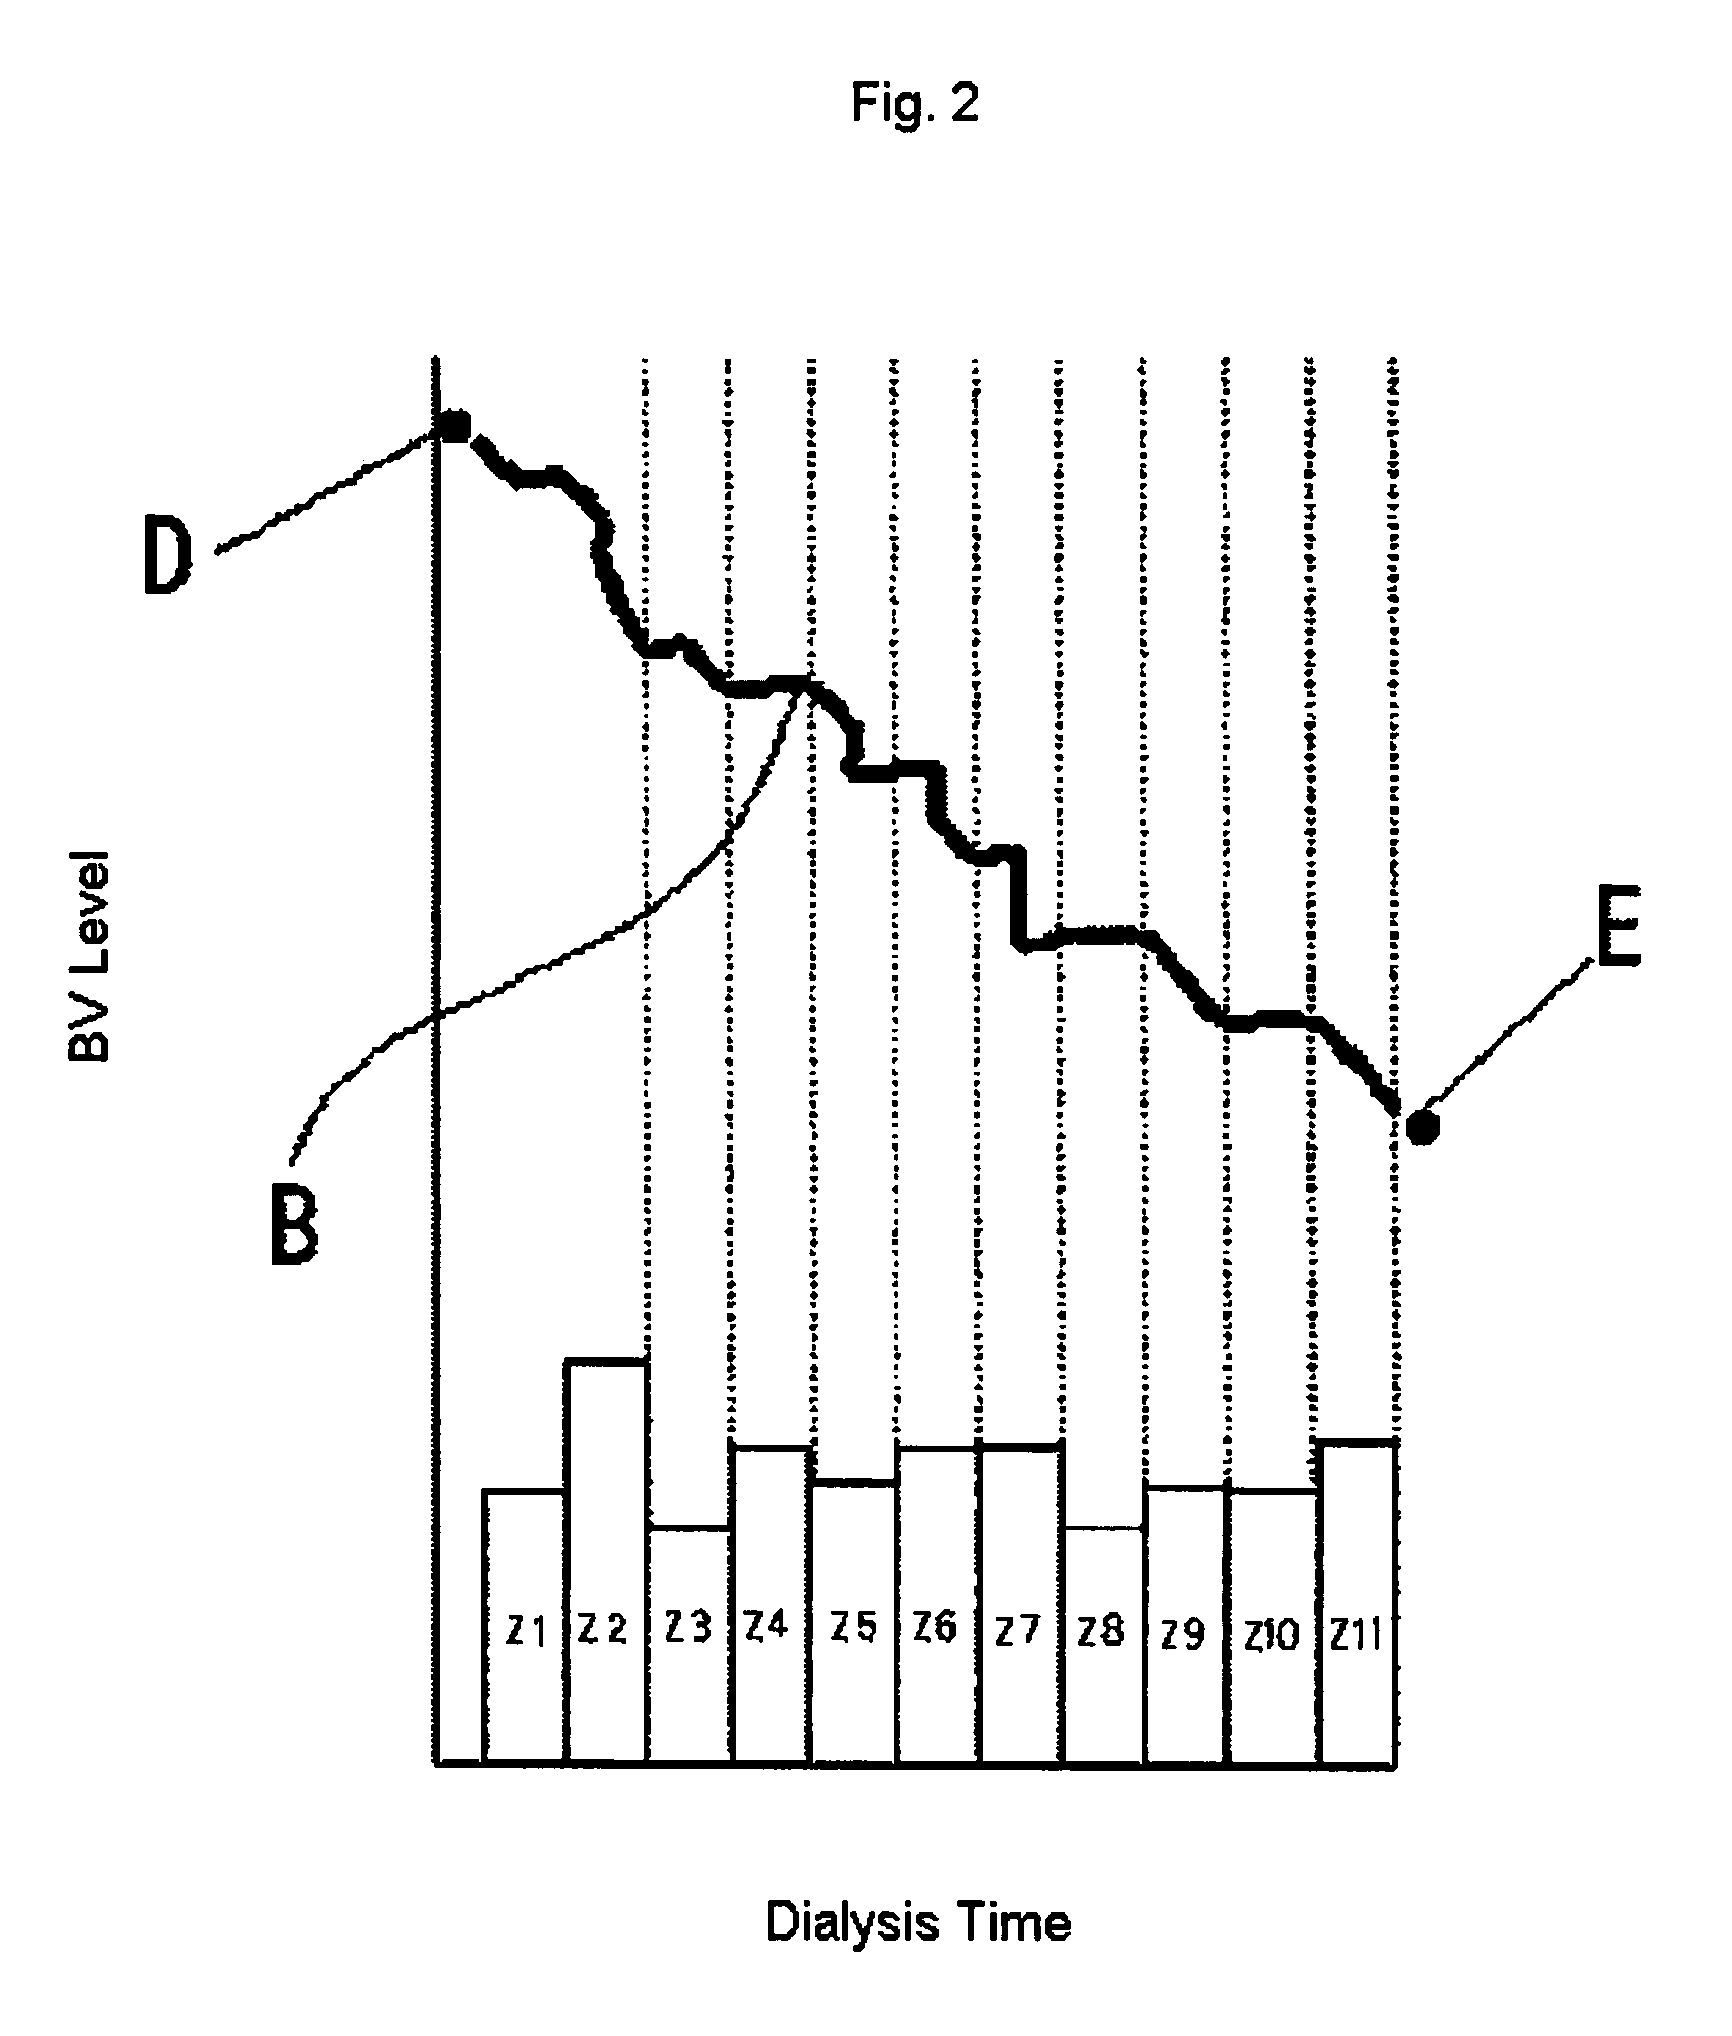 Blood purification apparatus for elevating purification efficiency